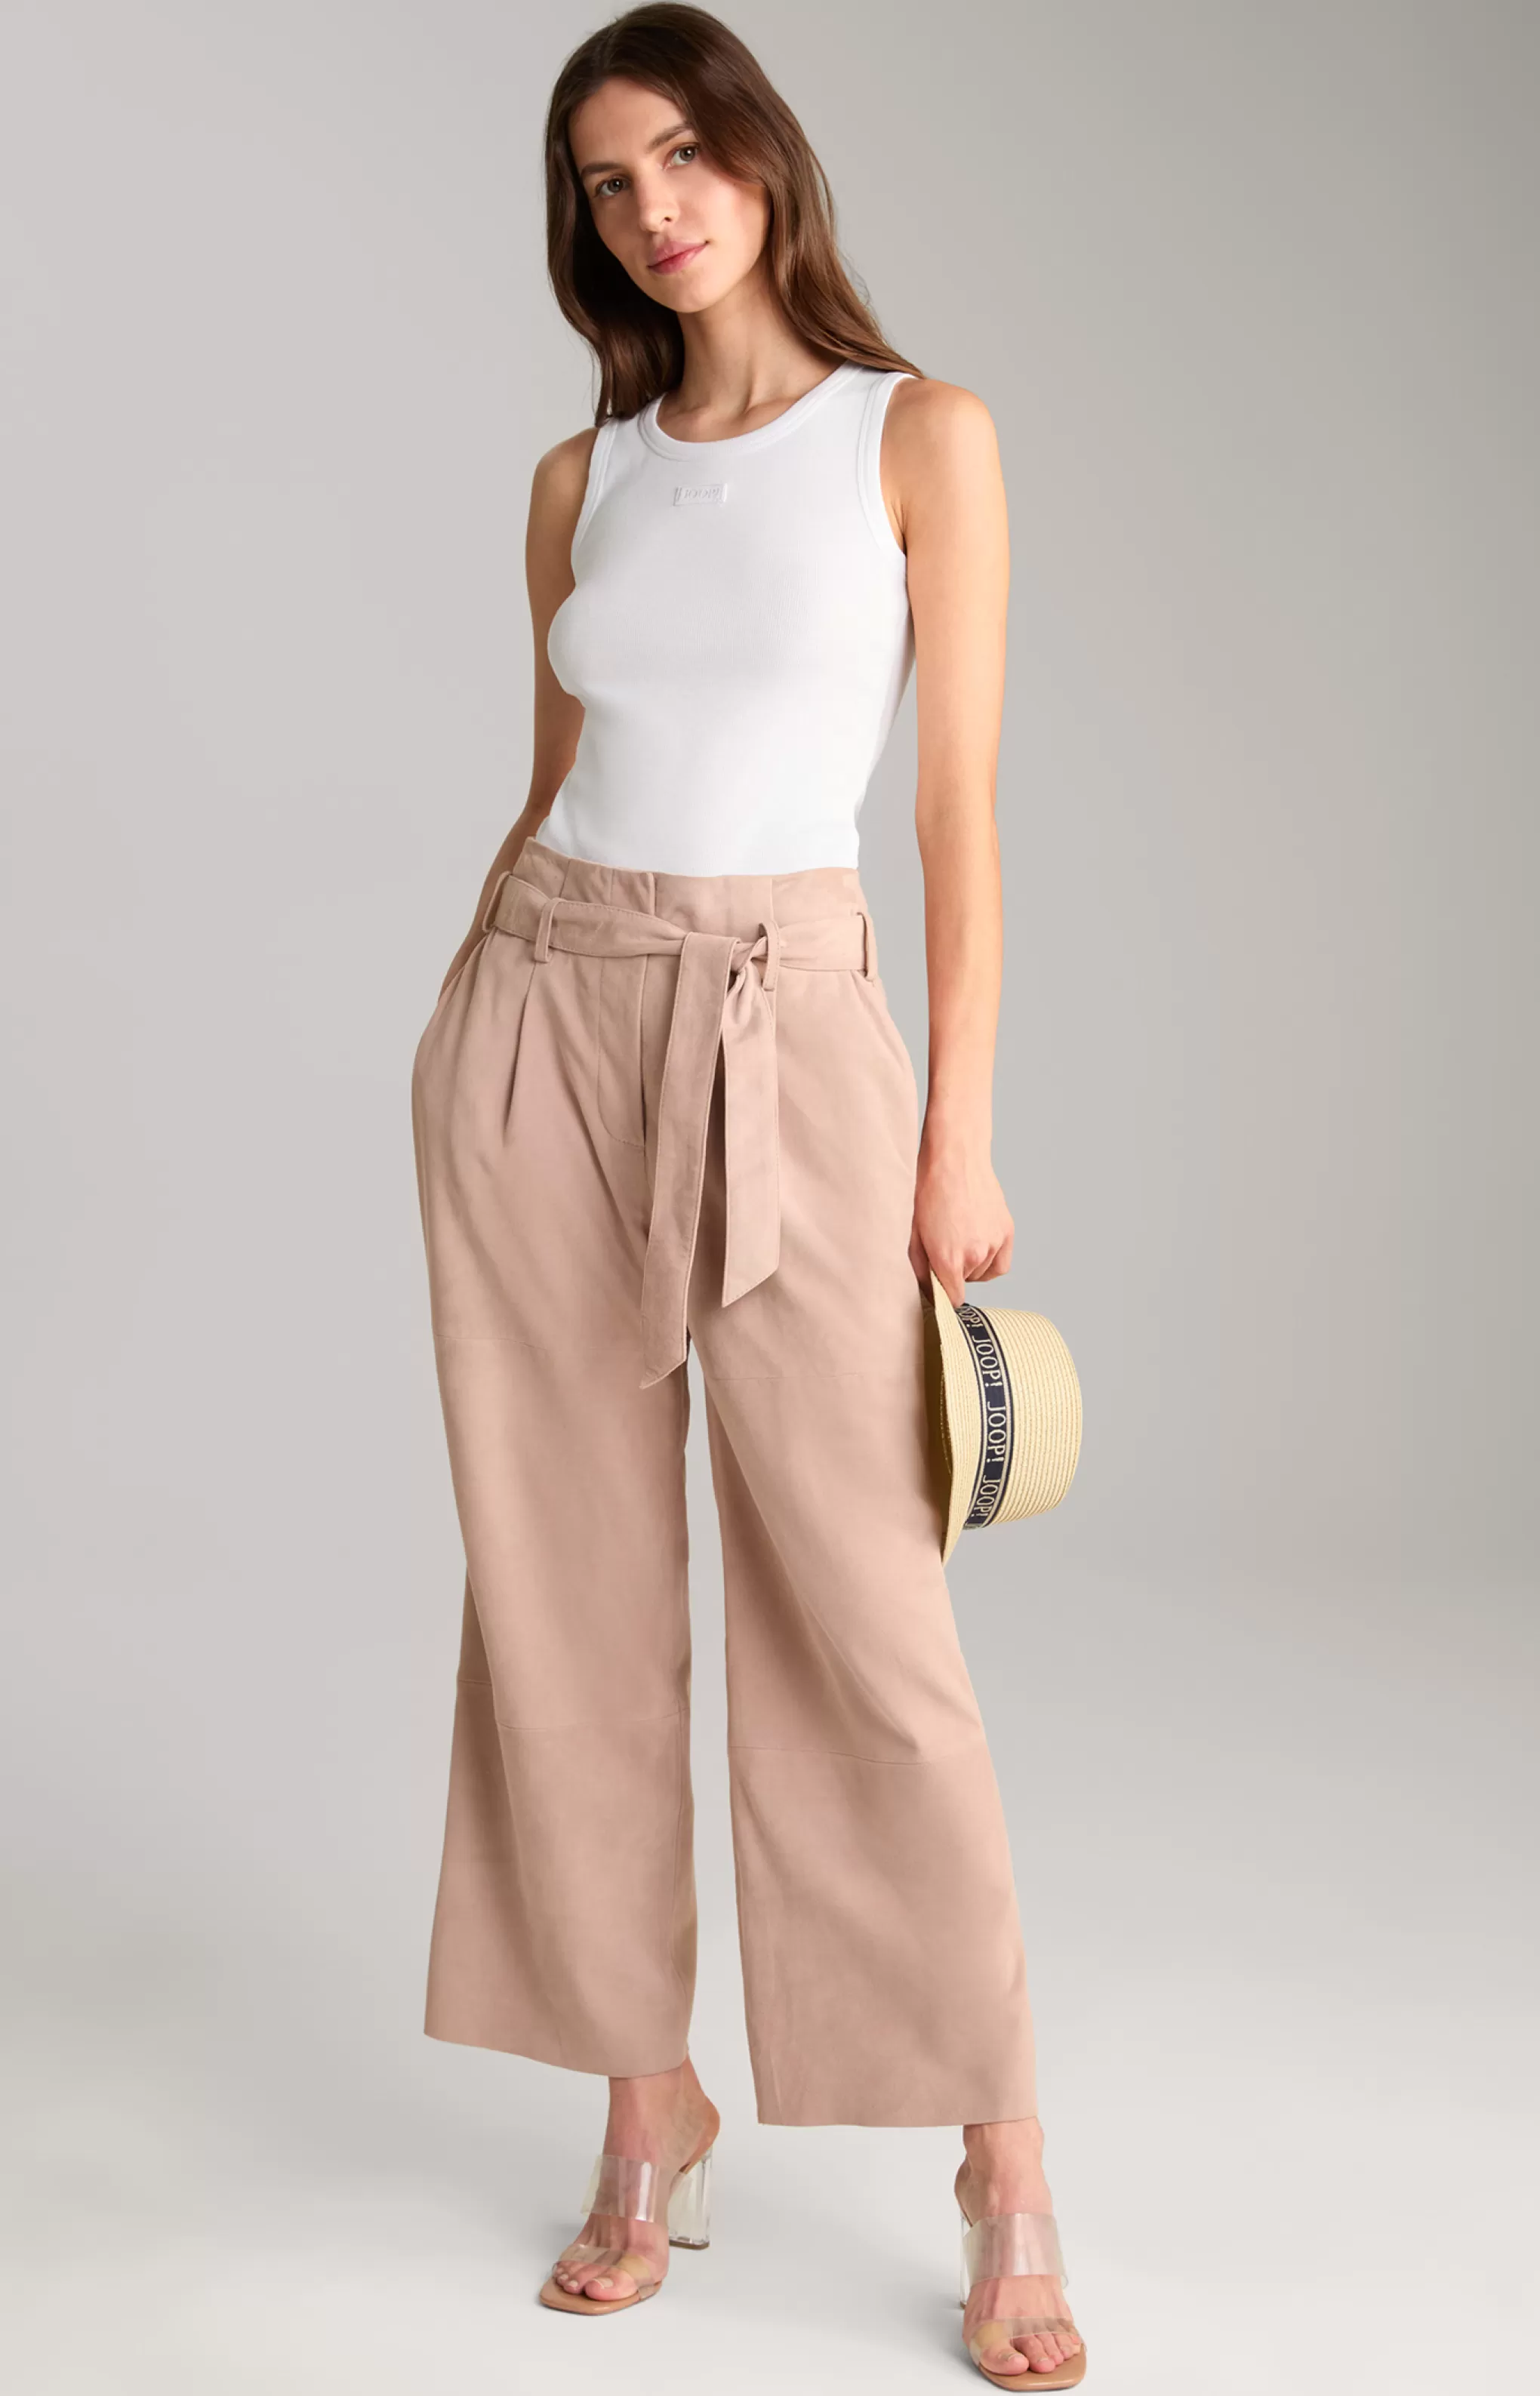 Leather | Trousers*JOOP Leather | Trousers Kidskin Suede Leather Trousers in